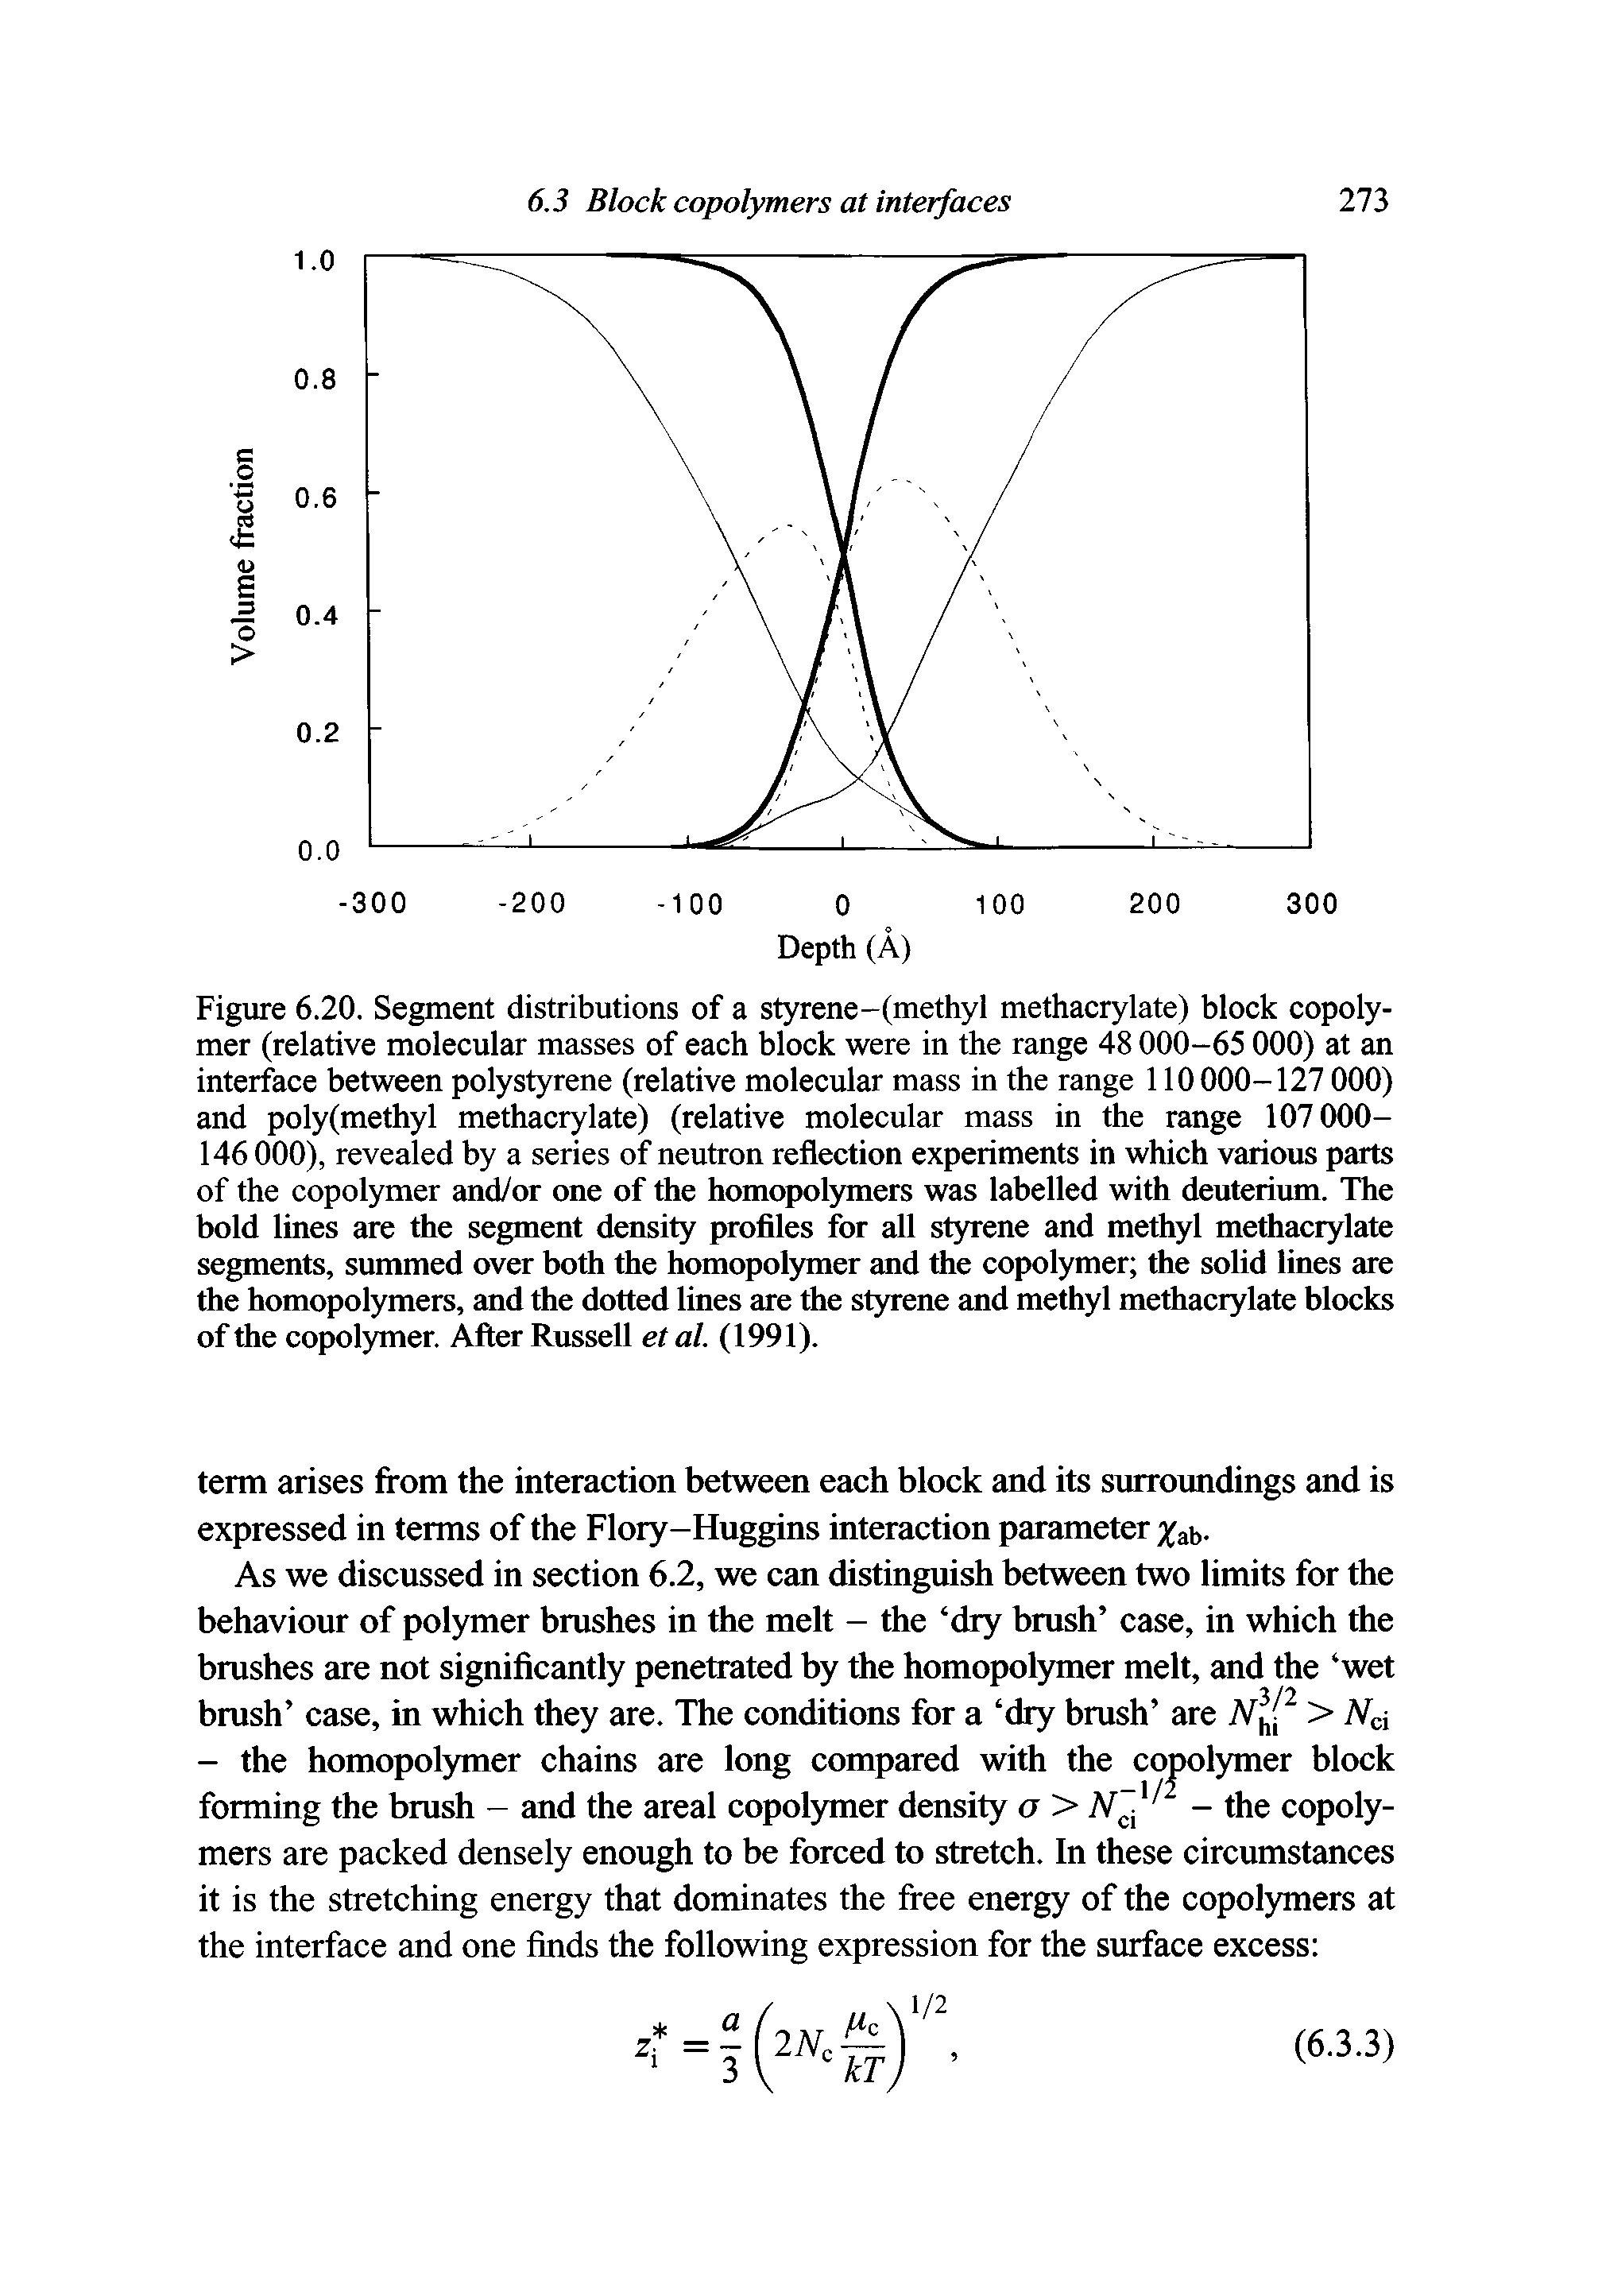 Figure 6.20. Segment distributions of a styrene-(methyl methacrylate) block copolymer (relative molecular masses of each block were in the range 48 000-65 000) at an interface between polystyrene (relative molecular mass in the range 110000-127 000) and poly(methyl methacrylate) (relative molecular mass in the range 107000-146 000), revealed by a series of neutron reflection experiments in which various parts of the copolymer and/or one of the homopolymers was labelled with deuterium. The bold lines are the segment density profiles for all styrene and methyl methacrylate segments, summed over both the homopolymer and the copolymer the solid lines are the homopolymers, and the dotted lines are the styrene and methyl methacrylate blocks of the copolymer. After Russell et al. (1991).